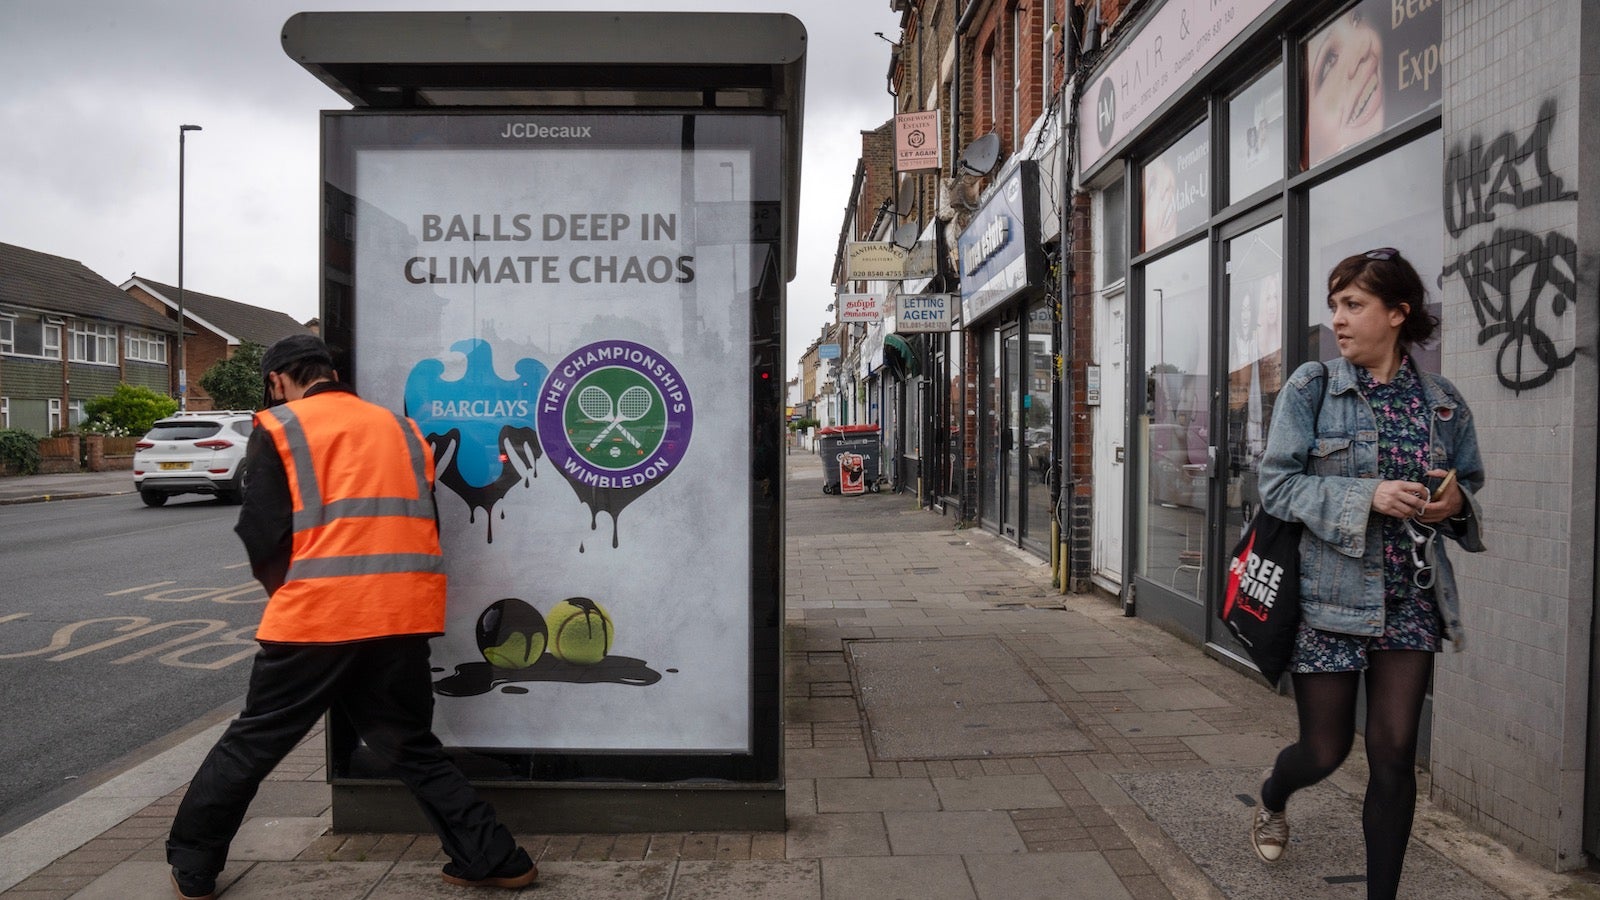 Artwork by Matt Bonner and installed by Brandalism protesting Wimbledon’s partnership with Barclays